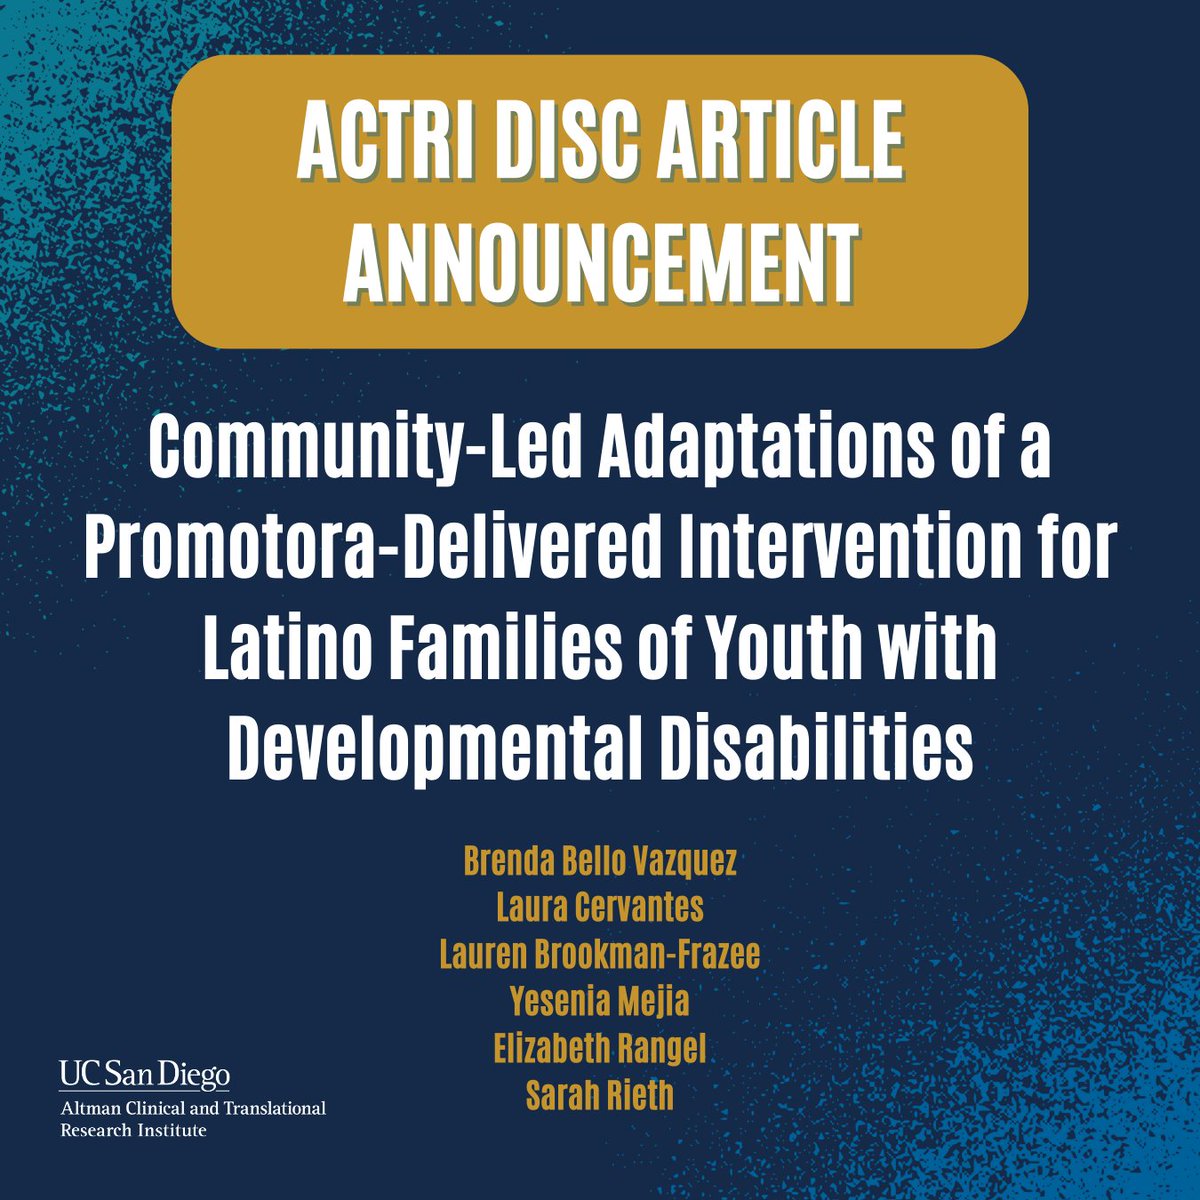 Delve into the impact of community-led adaptations! Discover a Promotora-delivered intervention, highlighting the effectiveness of culturally relevant approaches in bolstering support systems. Access the article here: ow.ly/4iHK50RbV05